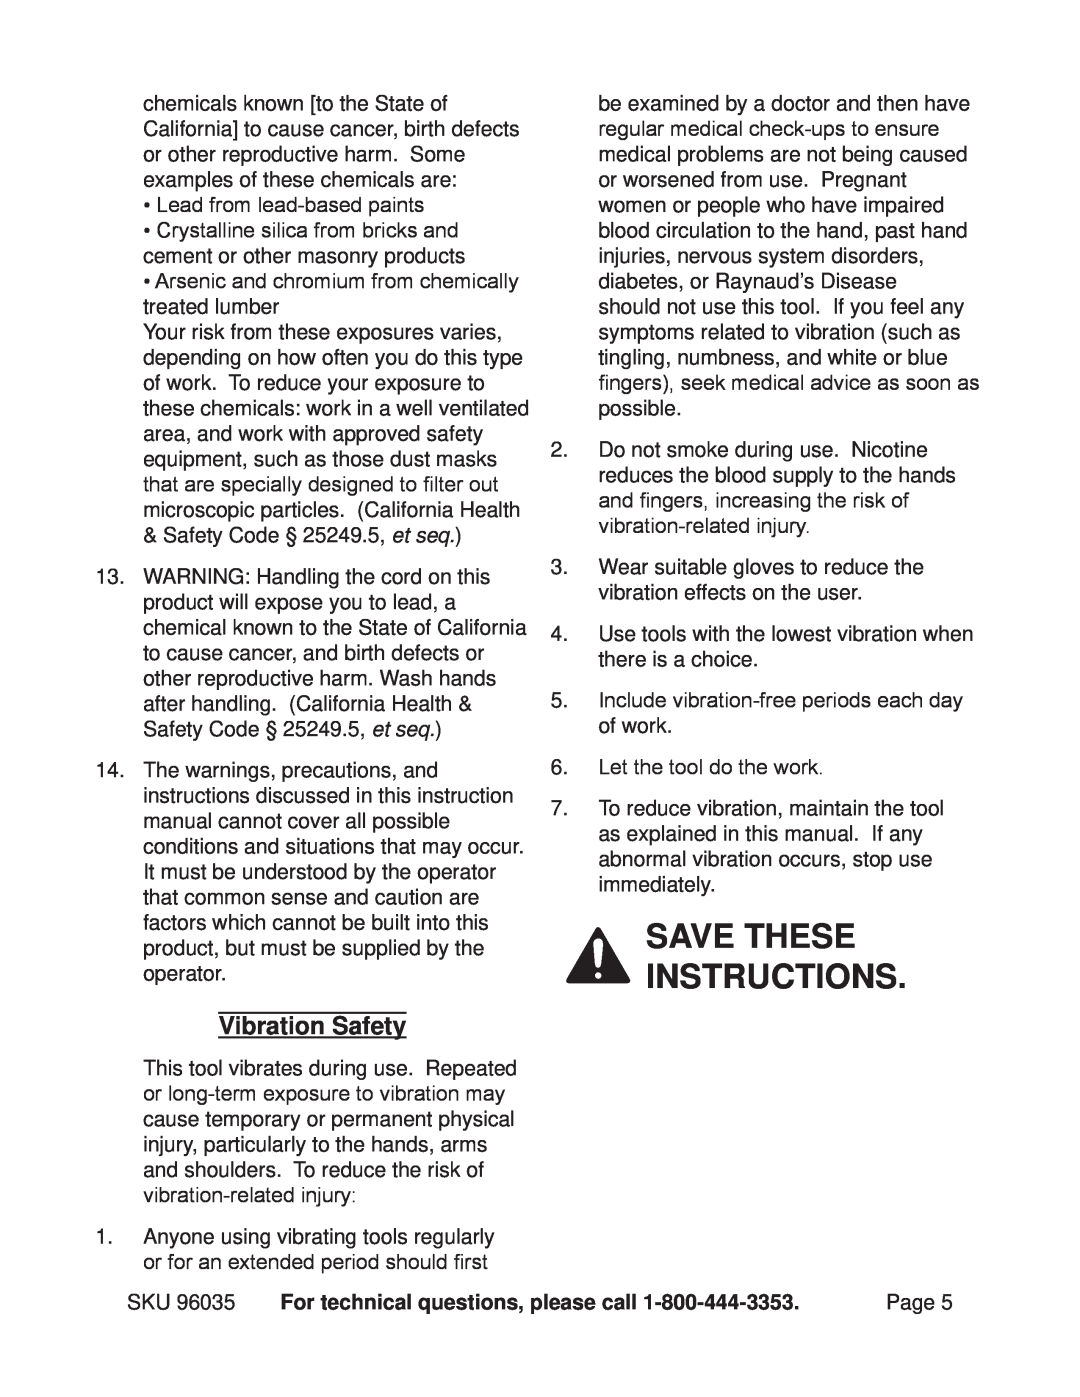 Chicago Electric 96035 operating instructions Save these instructions, Vibration Safety 